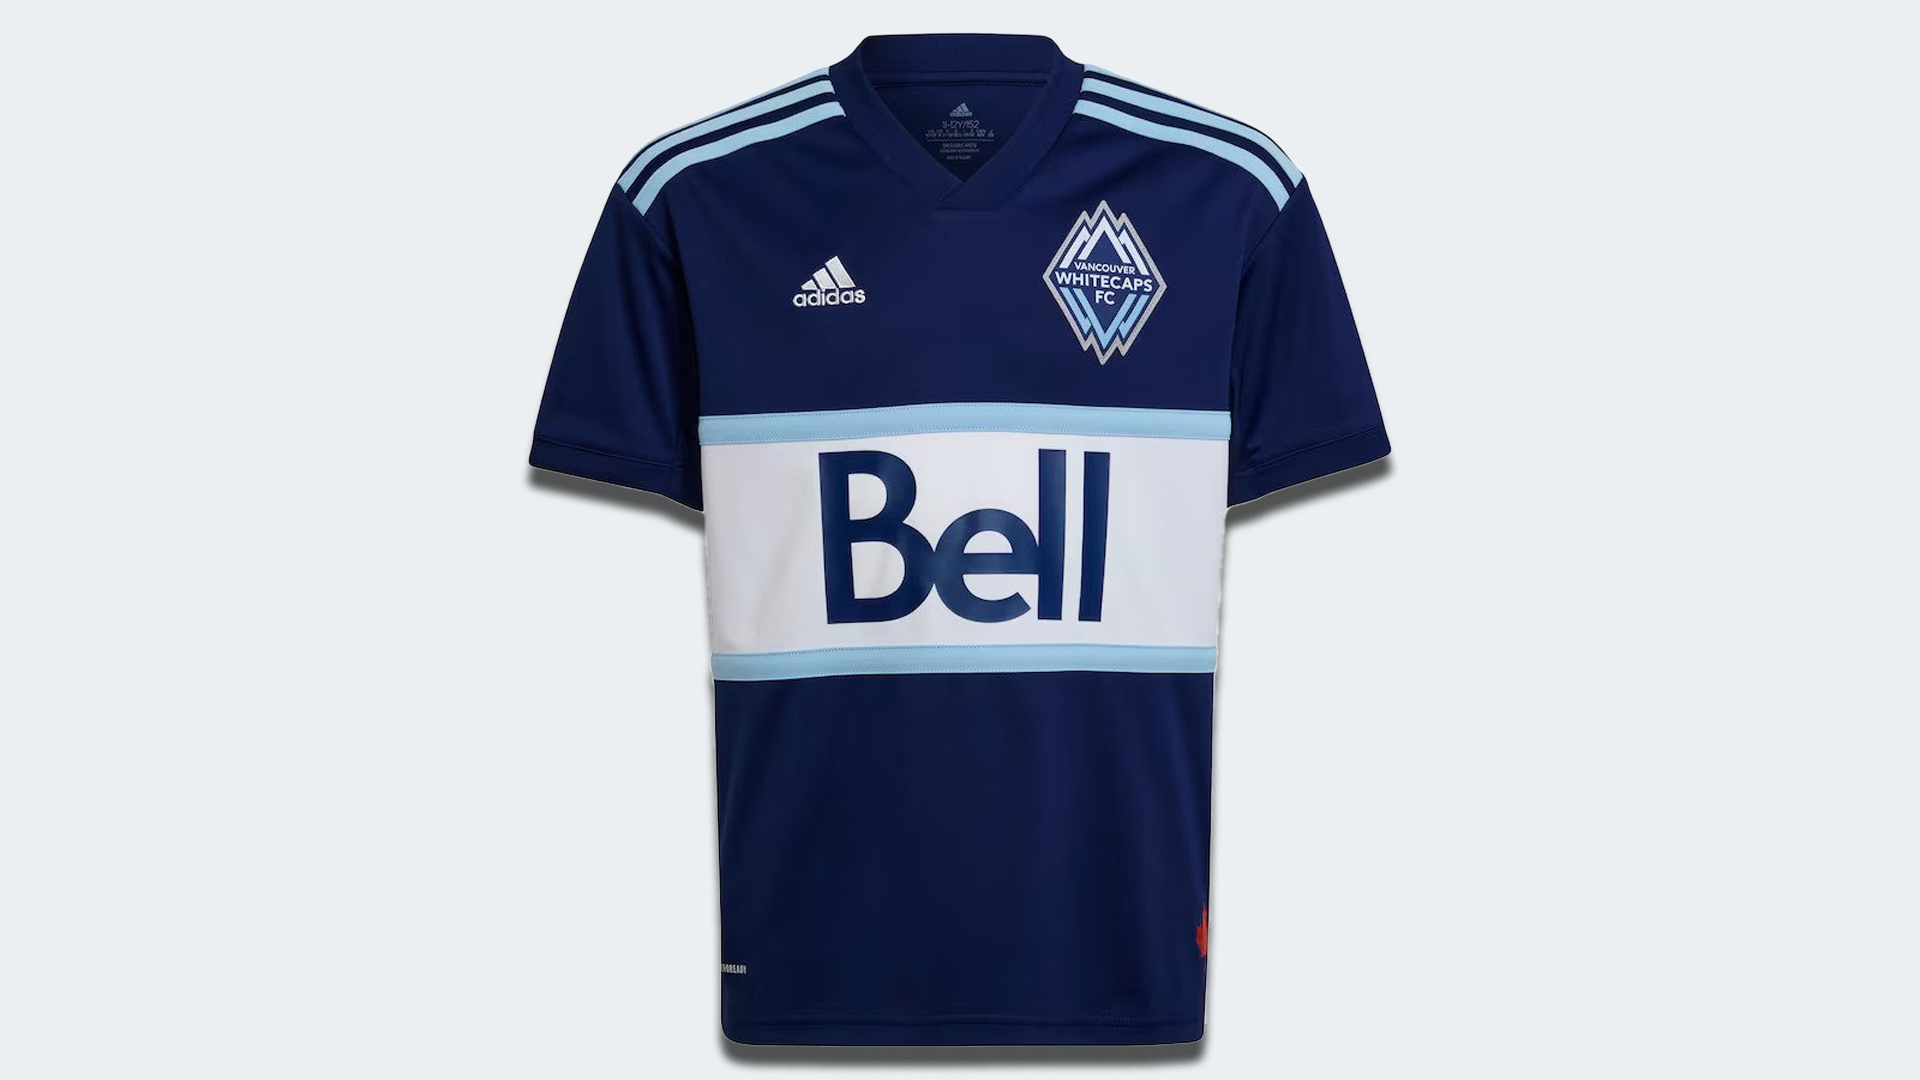 2020 Vancouver Whitecaps jersey - The Wave jersey